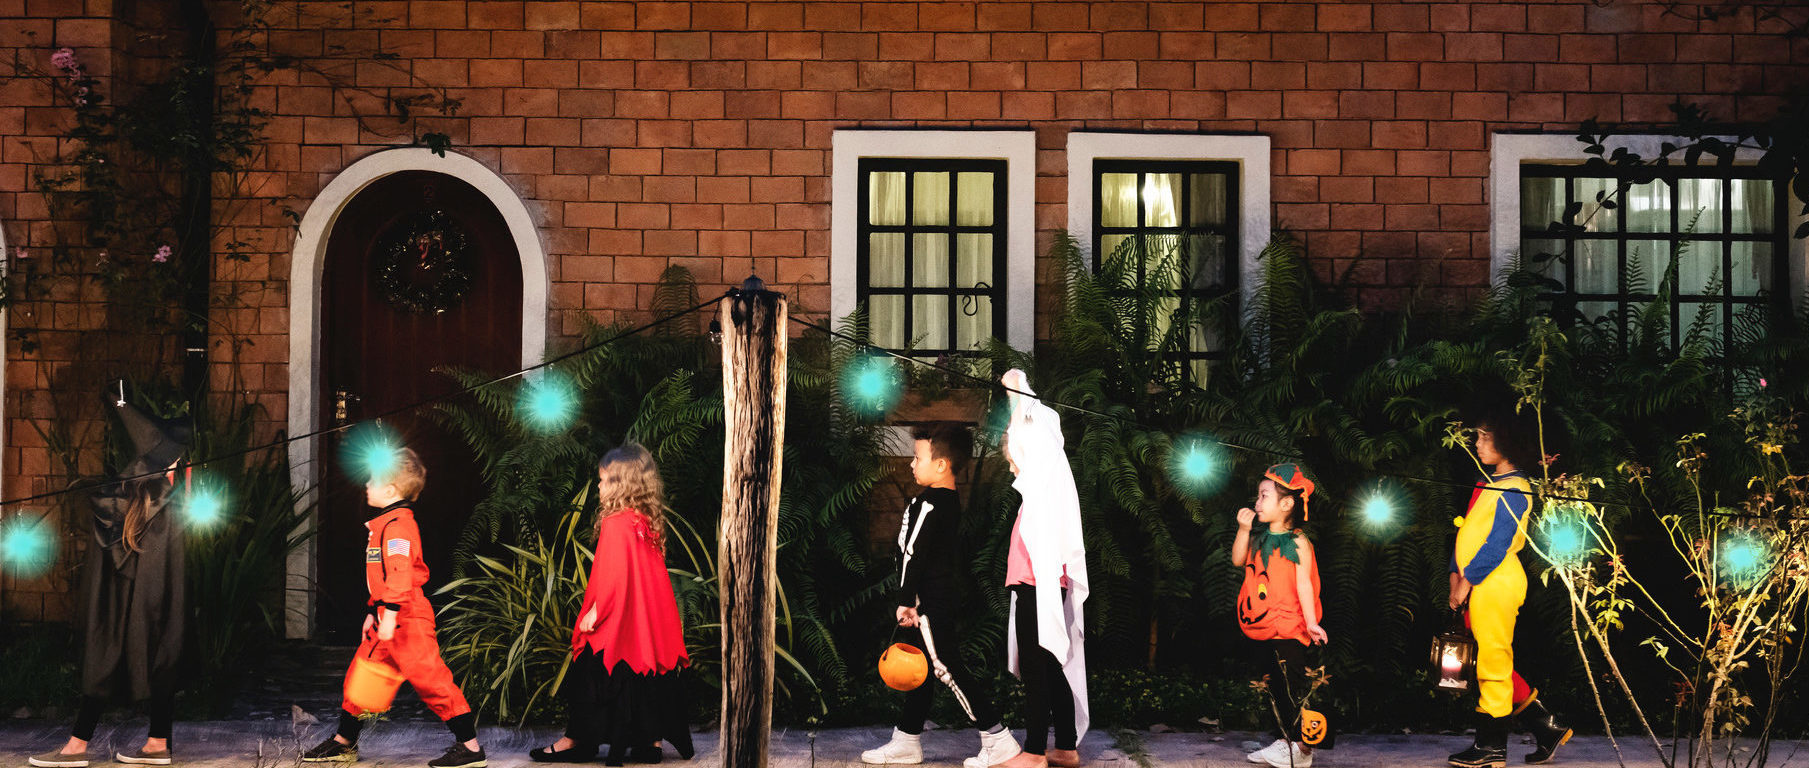 Children trick-or-treating while keeping social distance